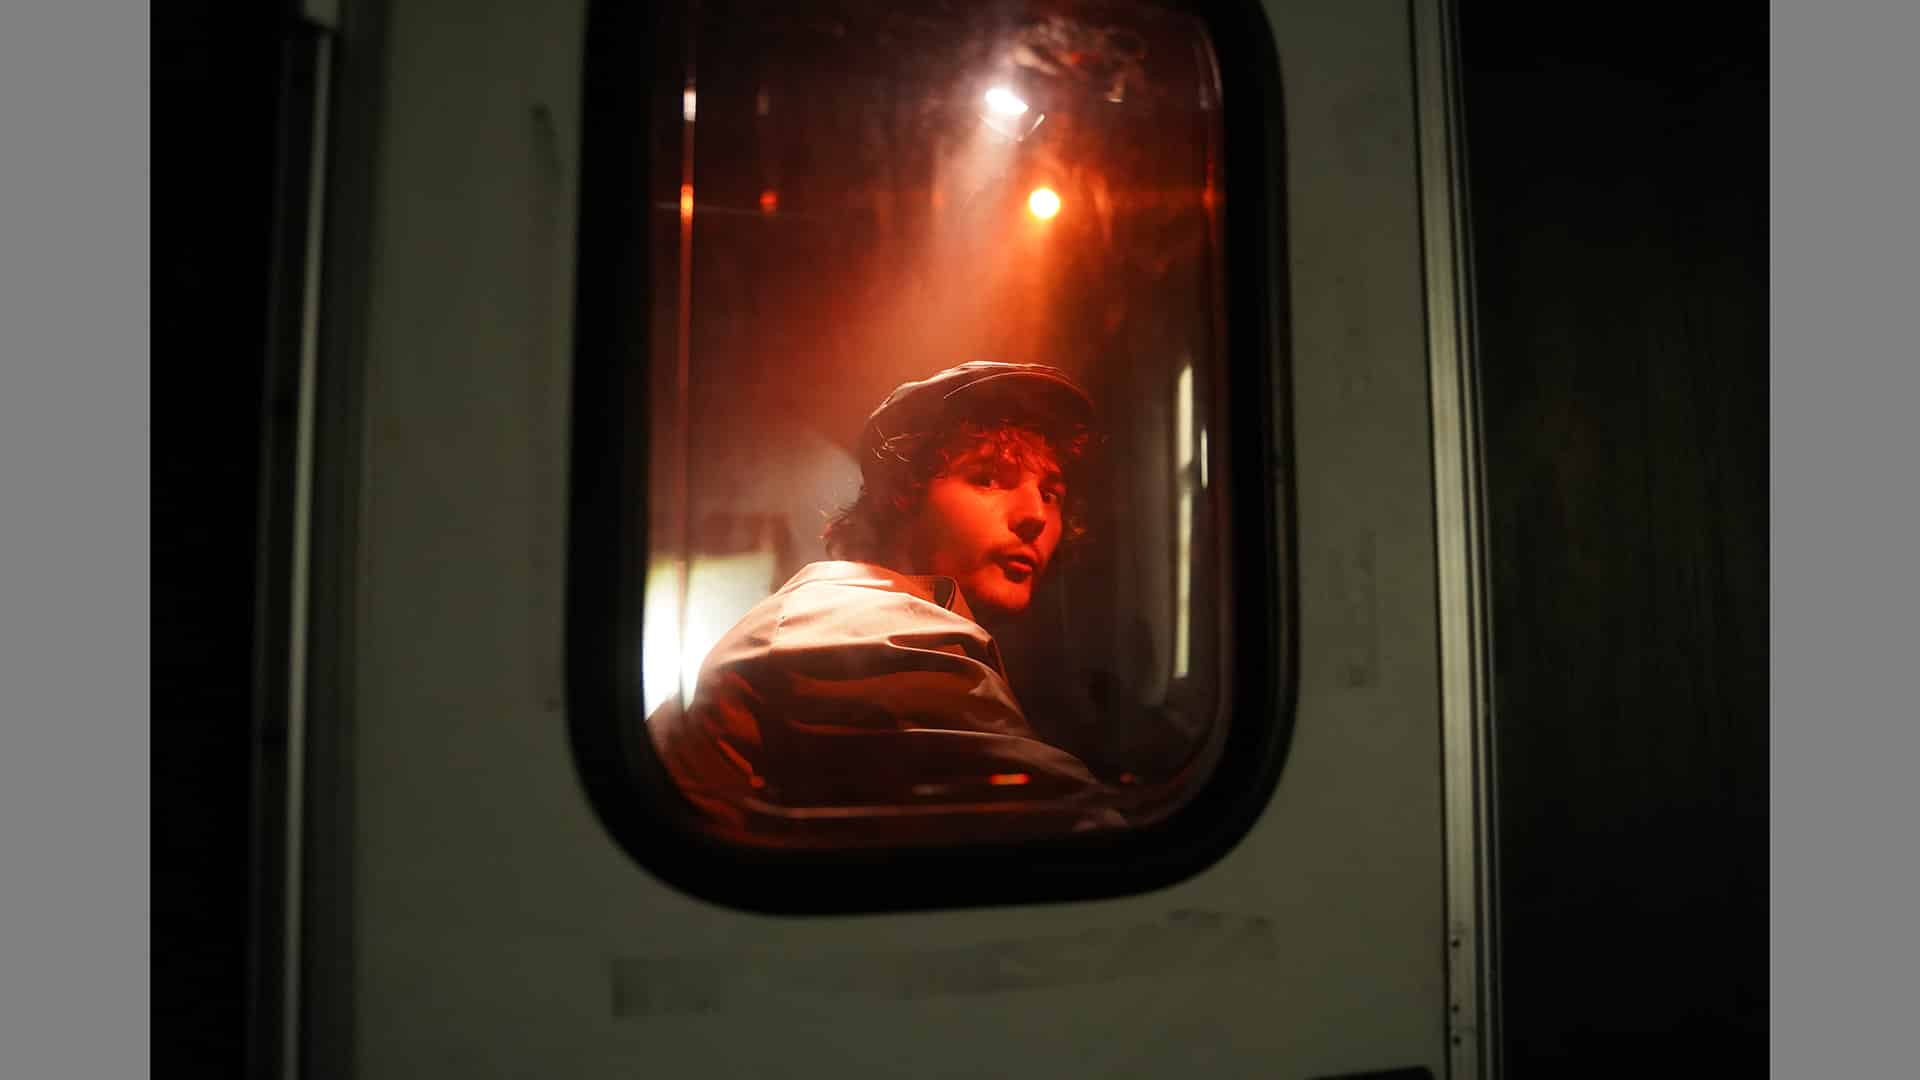 Person bathed in red light looks over their shoulder, out of a window